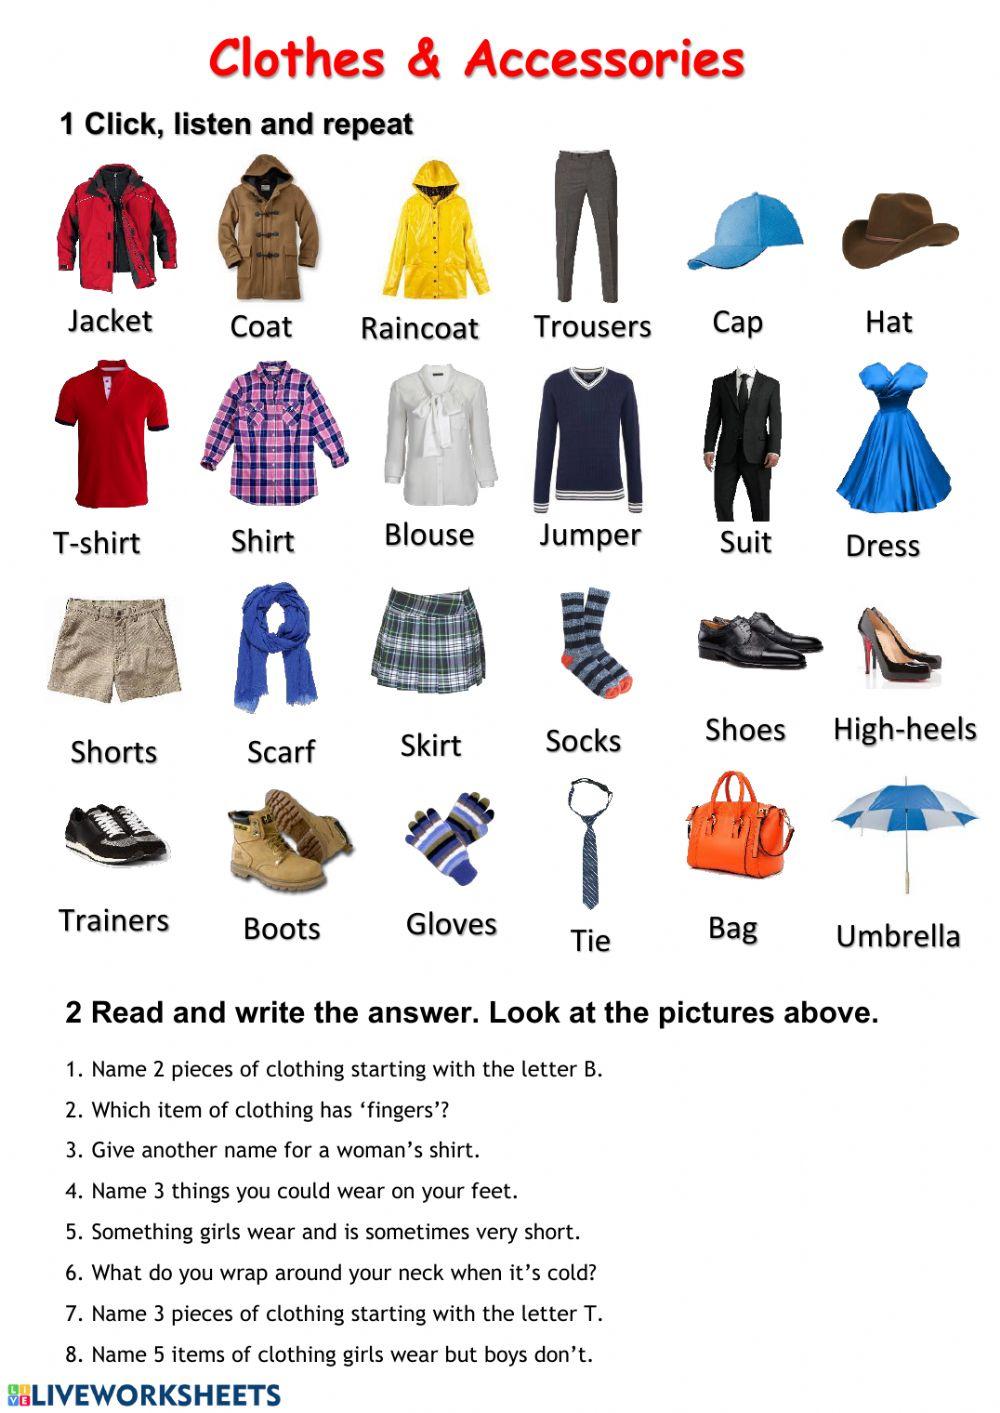 Clothes and accessories online exercise for